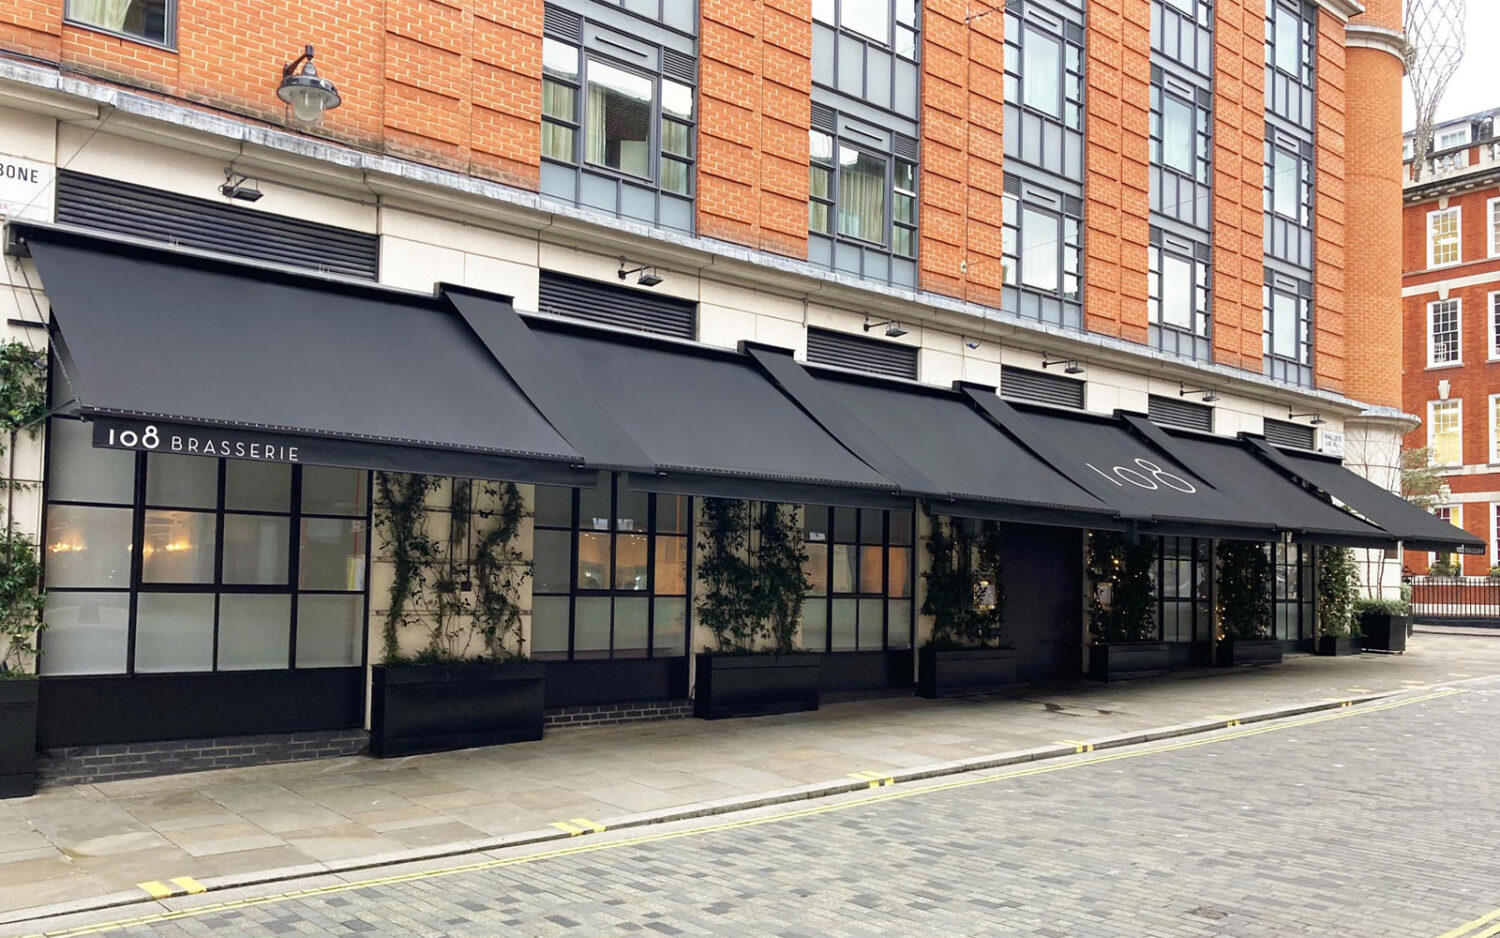 Traditional awnings